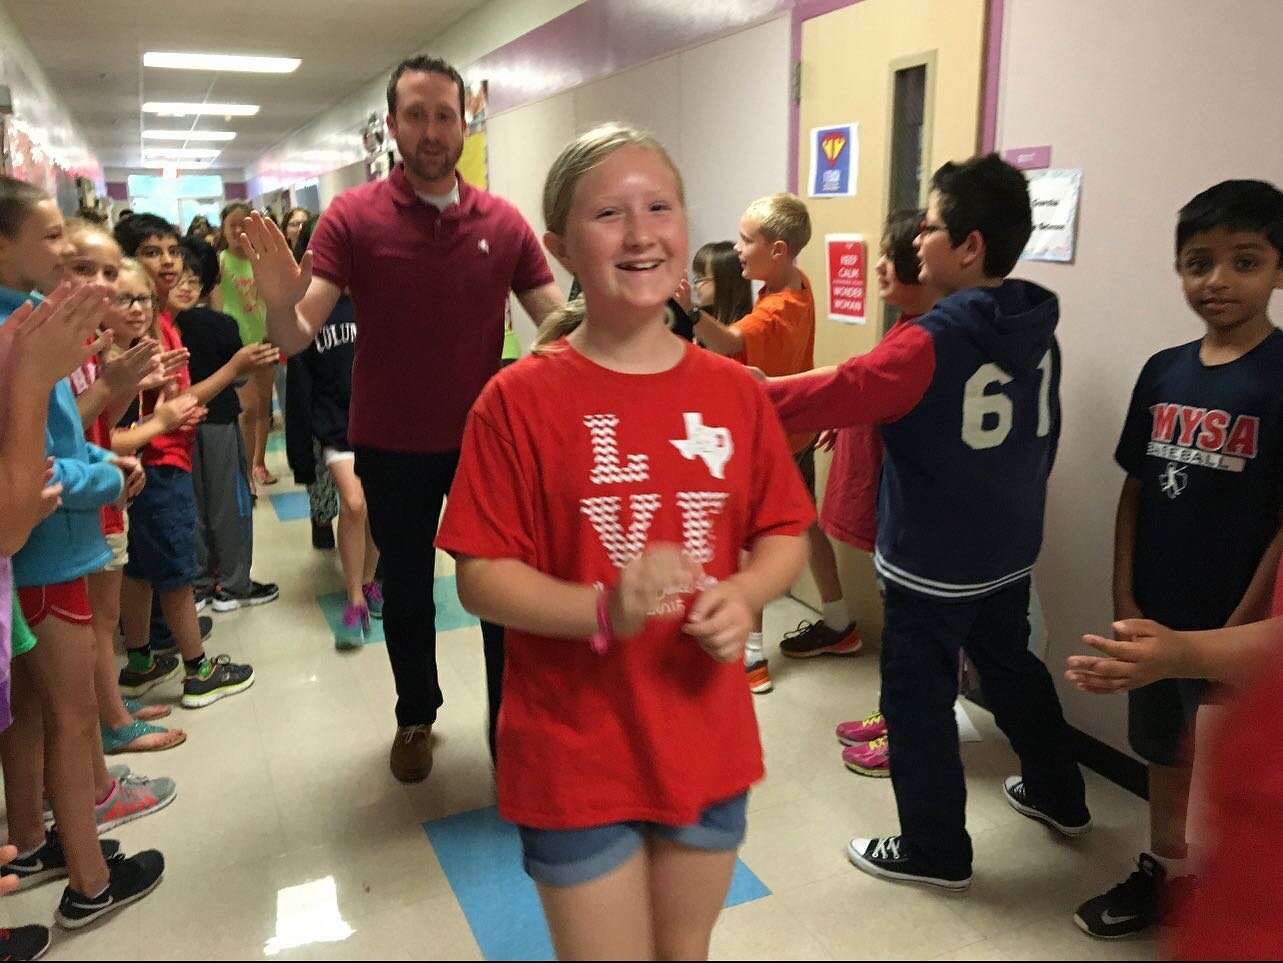 Walking the halls for her 5th grade graduation&hellip;.now getting ready to walk these same halls as a Senior🥰